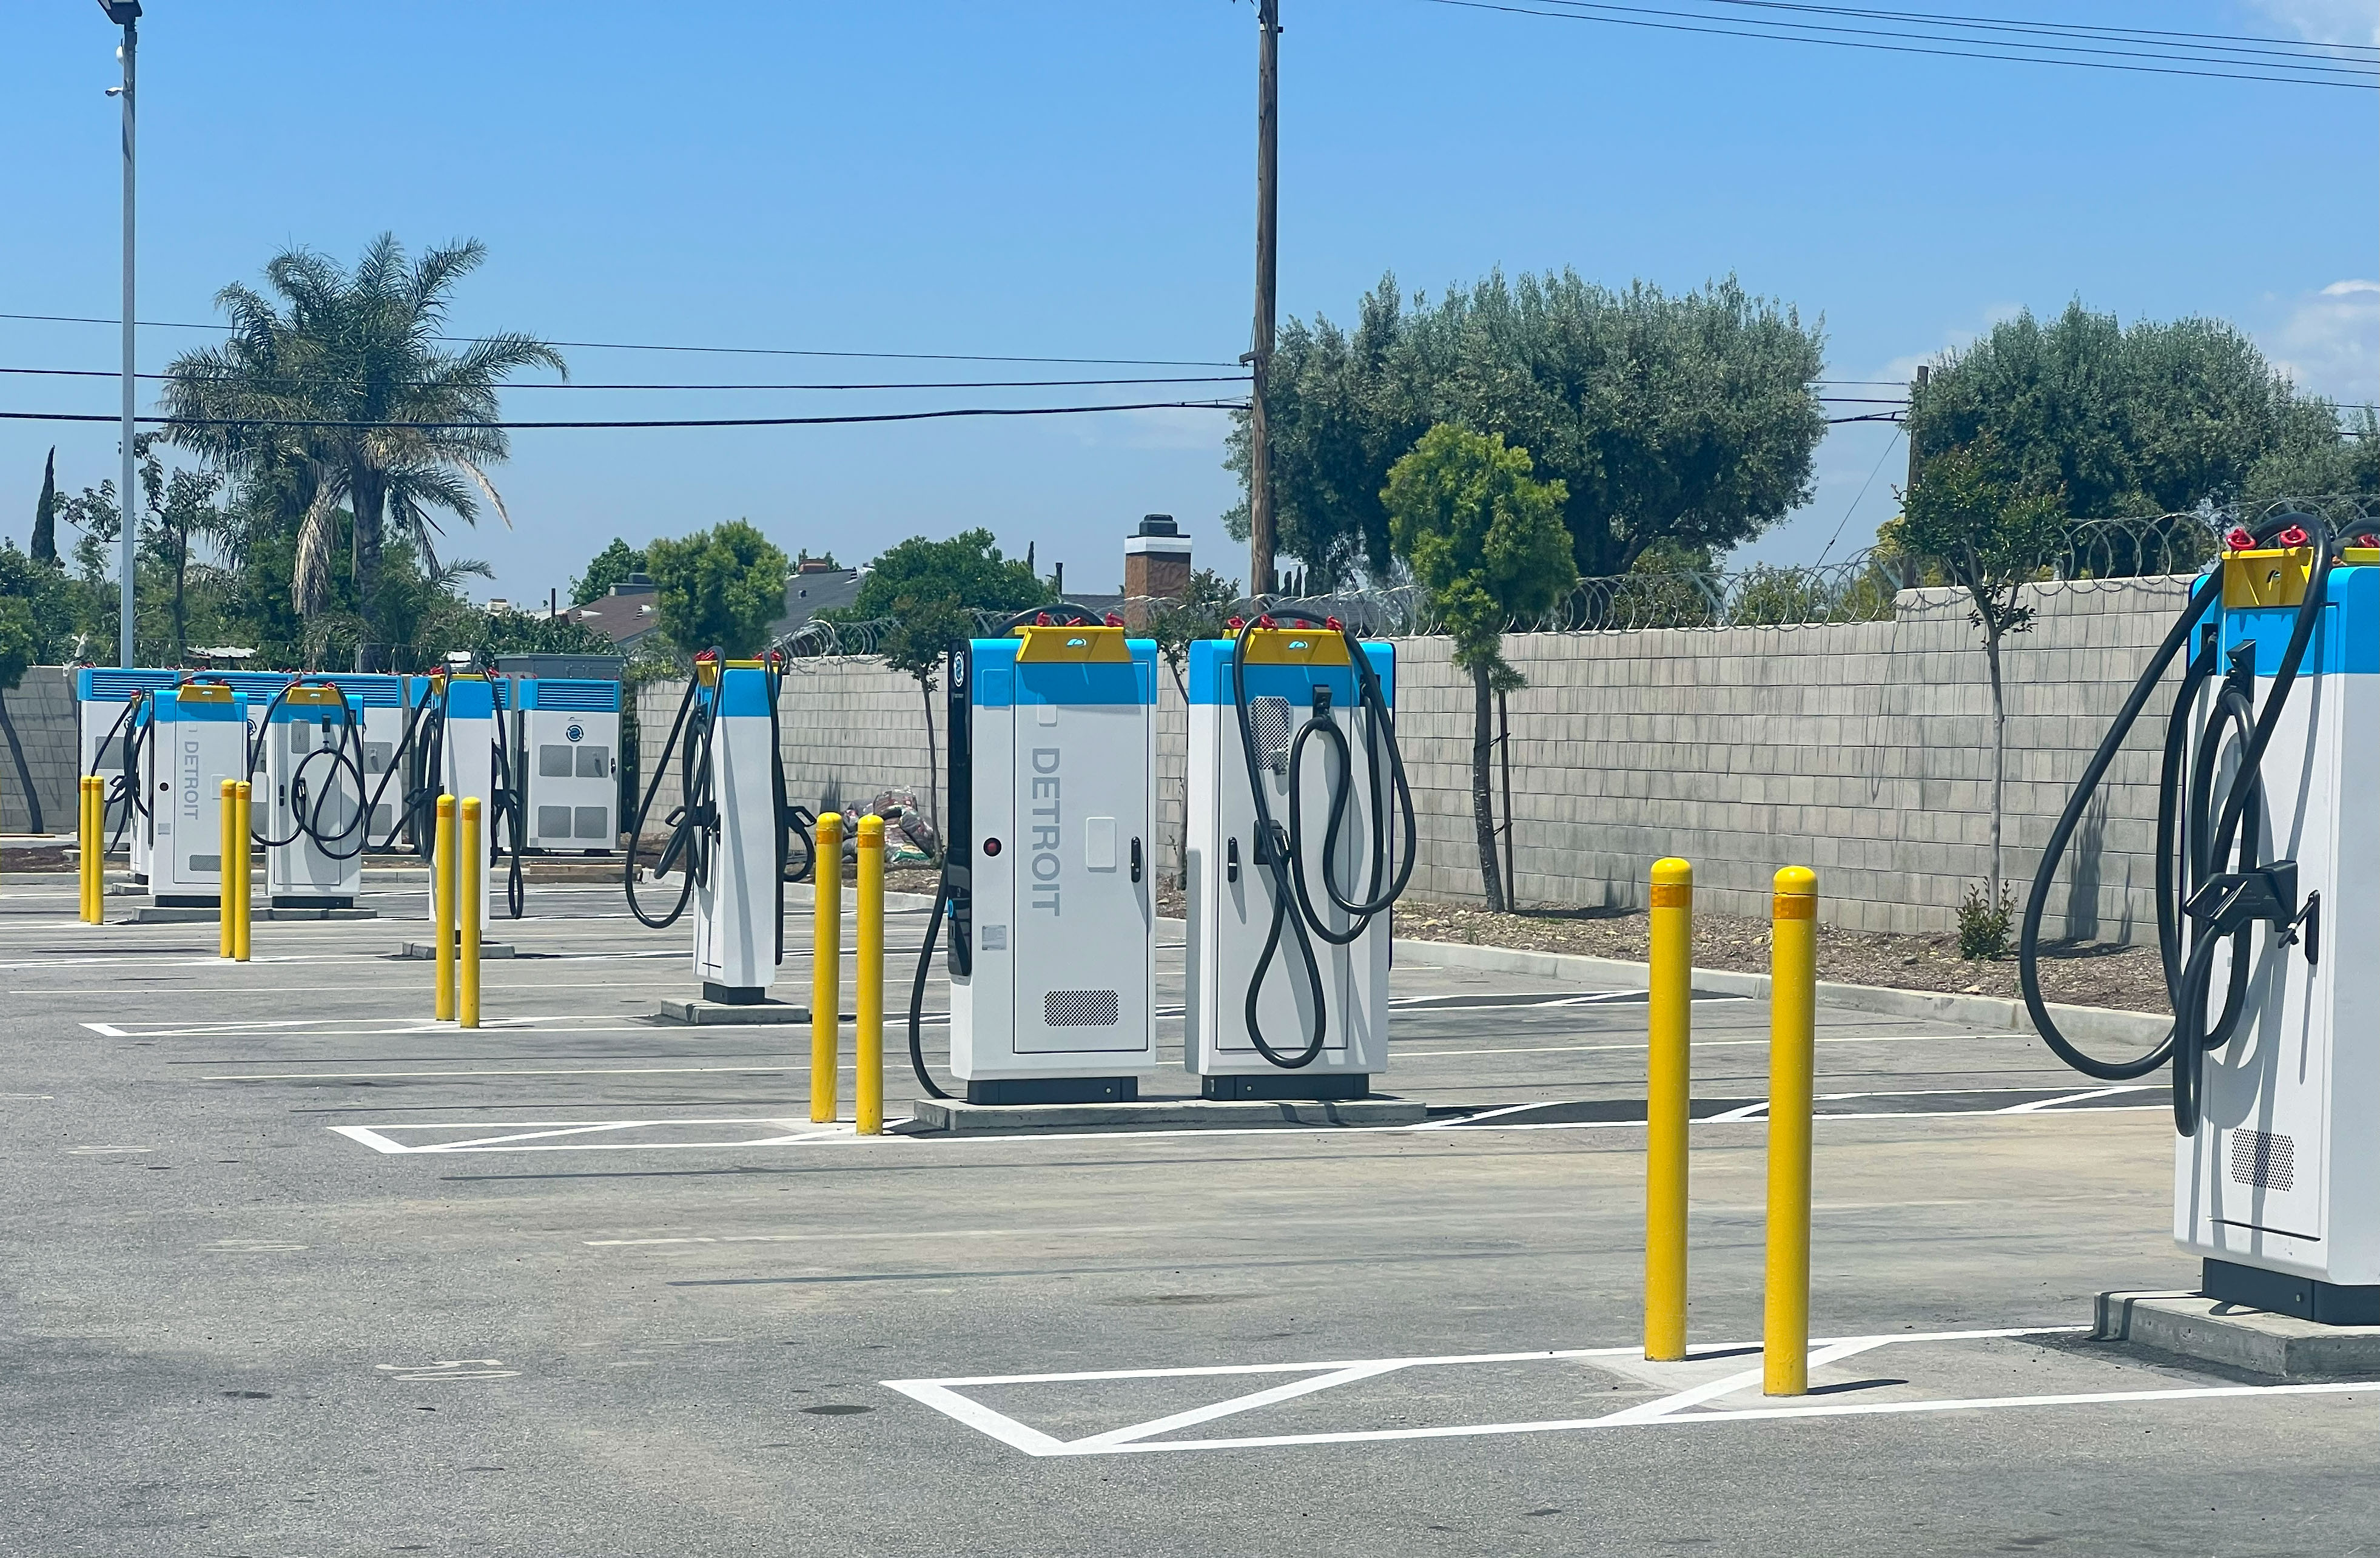 Velocity Truck Rental & Leasing Powers Up Electromobility with 47 New High-Powered Chargers in Southern California